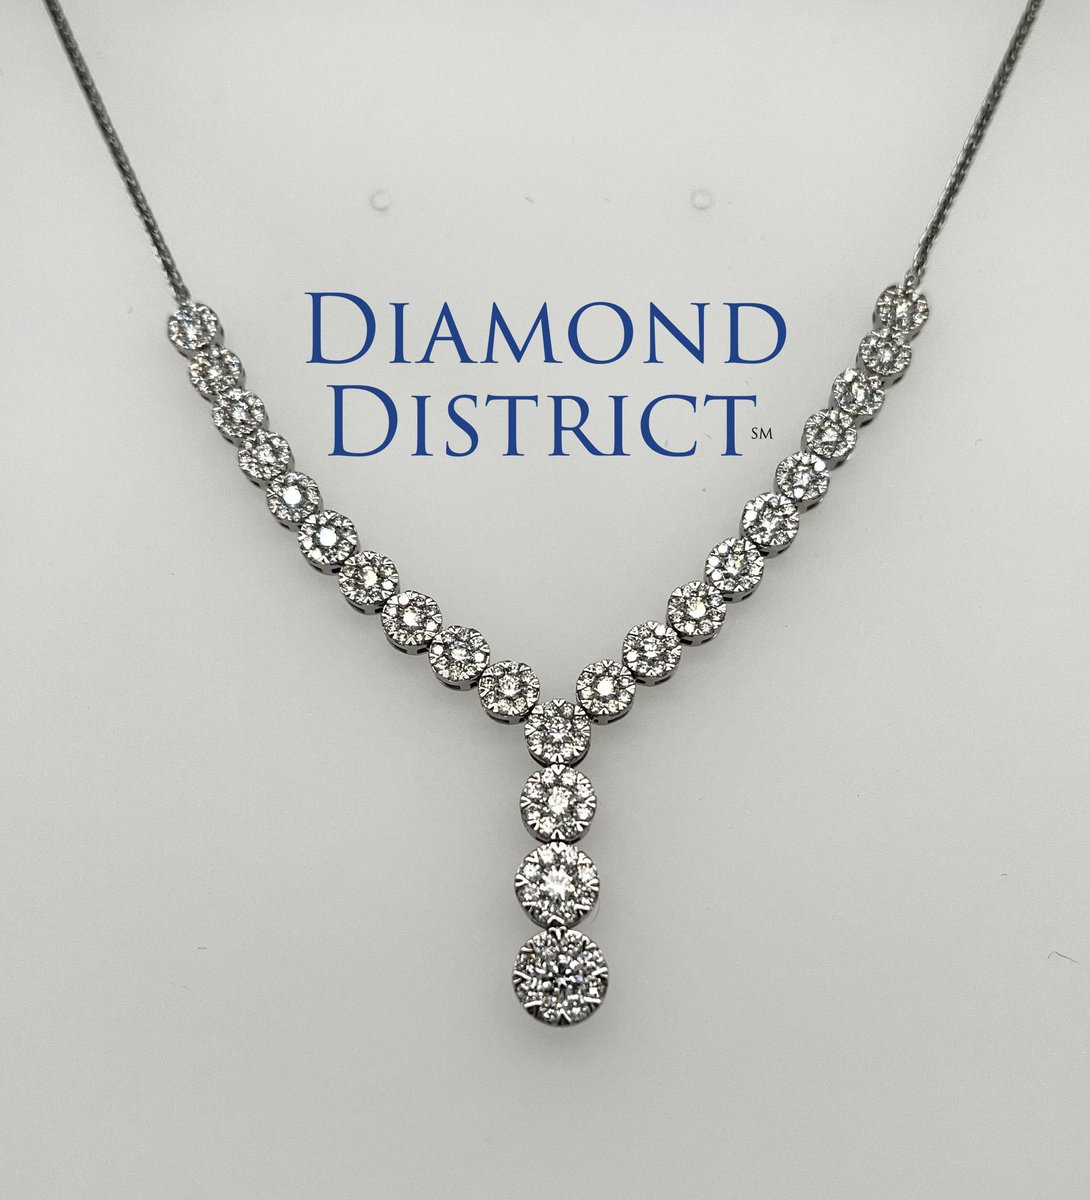 Thank you Diamond District for sponsoring the online auction with this beautiful 14 carat Diamond & white gold “Y necklace” features multiple diamonds for a total weight of 2.25. Maybe something a surprise for a special someone for Valentines Day! #GivingisGroovy